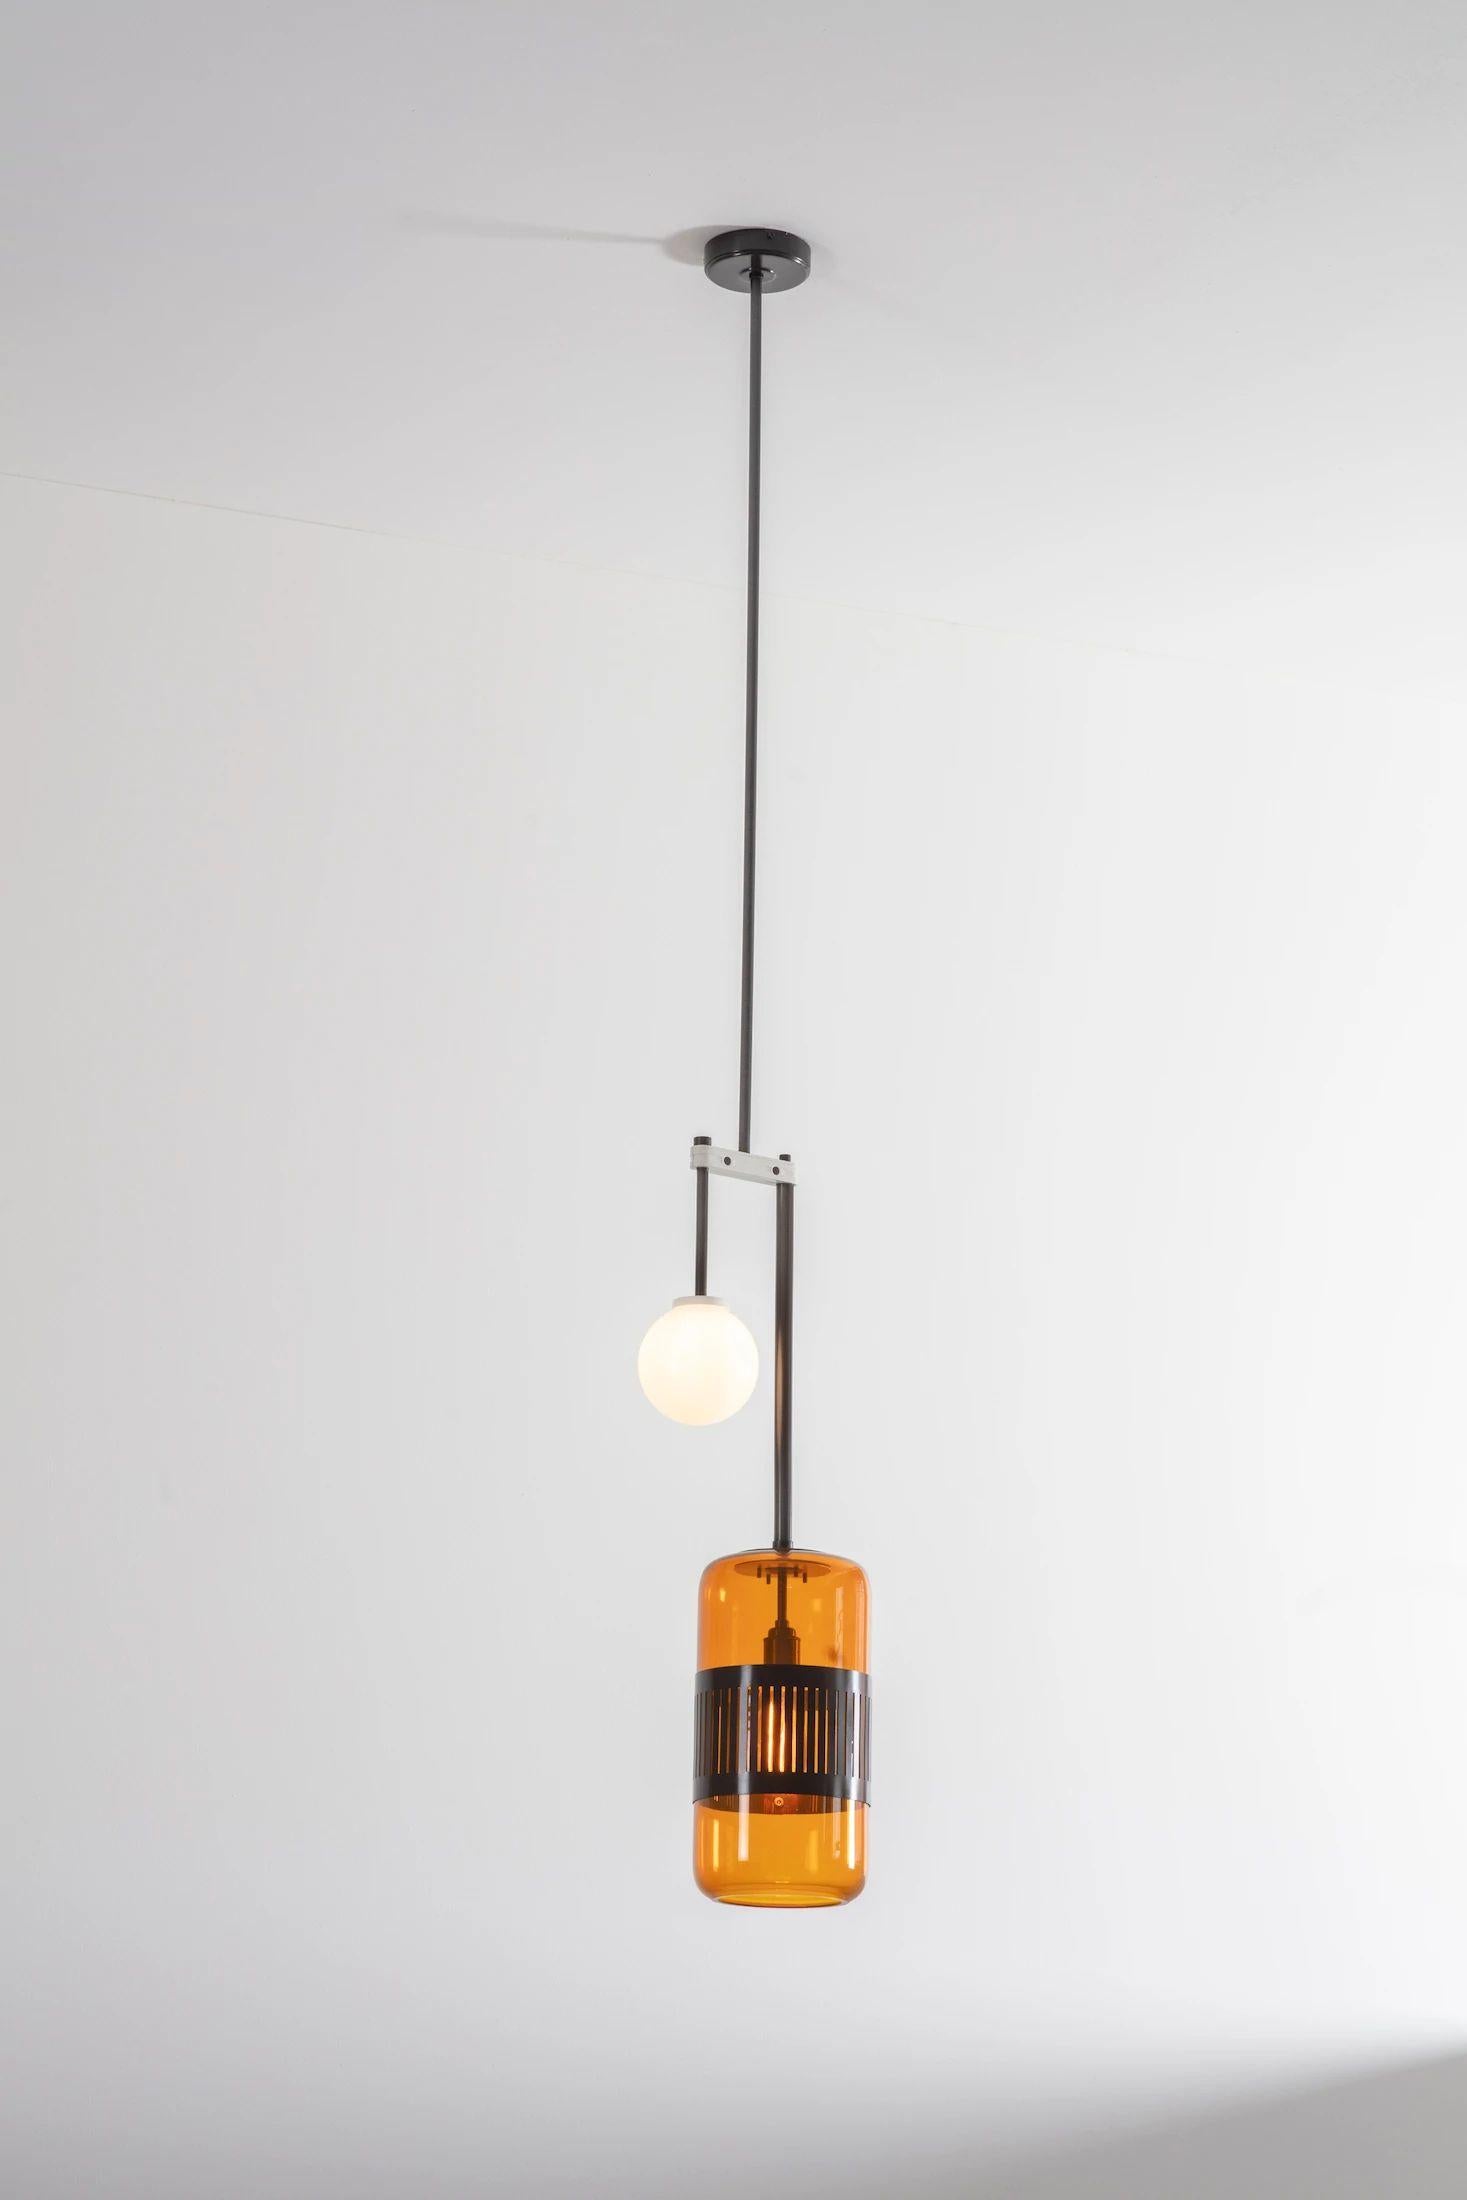 Amber bronze Lizak drop pendant by Bert Frank
Dimensions: D 78 x W 27 x H 78 cm
Materials: bronze and glass

Available finishes: brass, opal and blue
All our lamps can be wired according to each country. If sold to the USA it will be wired for